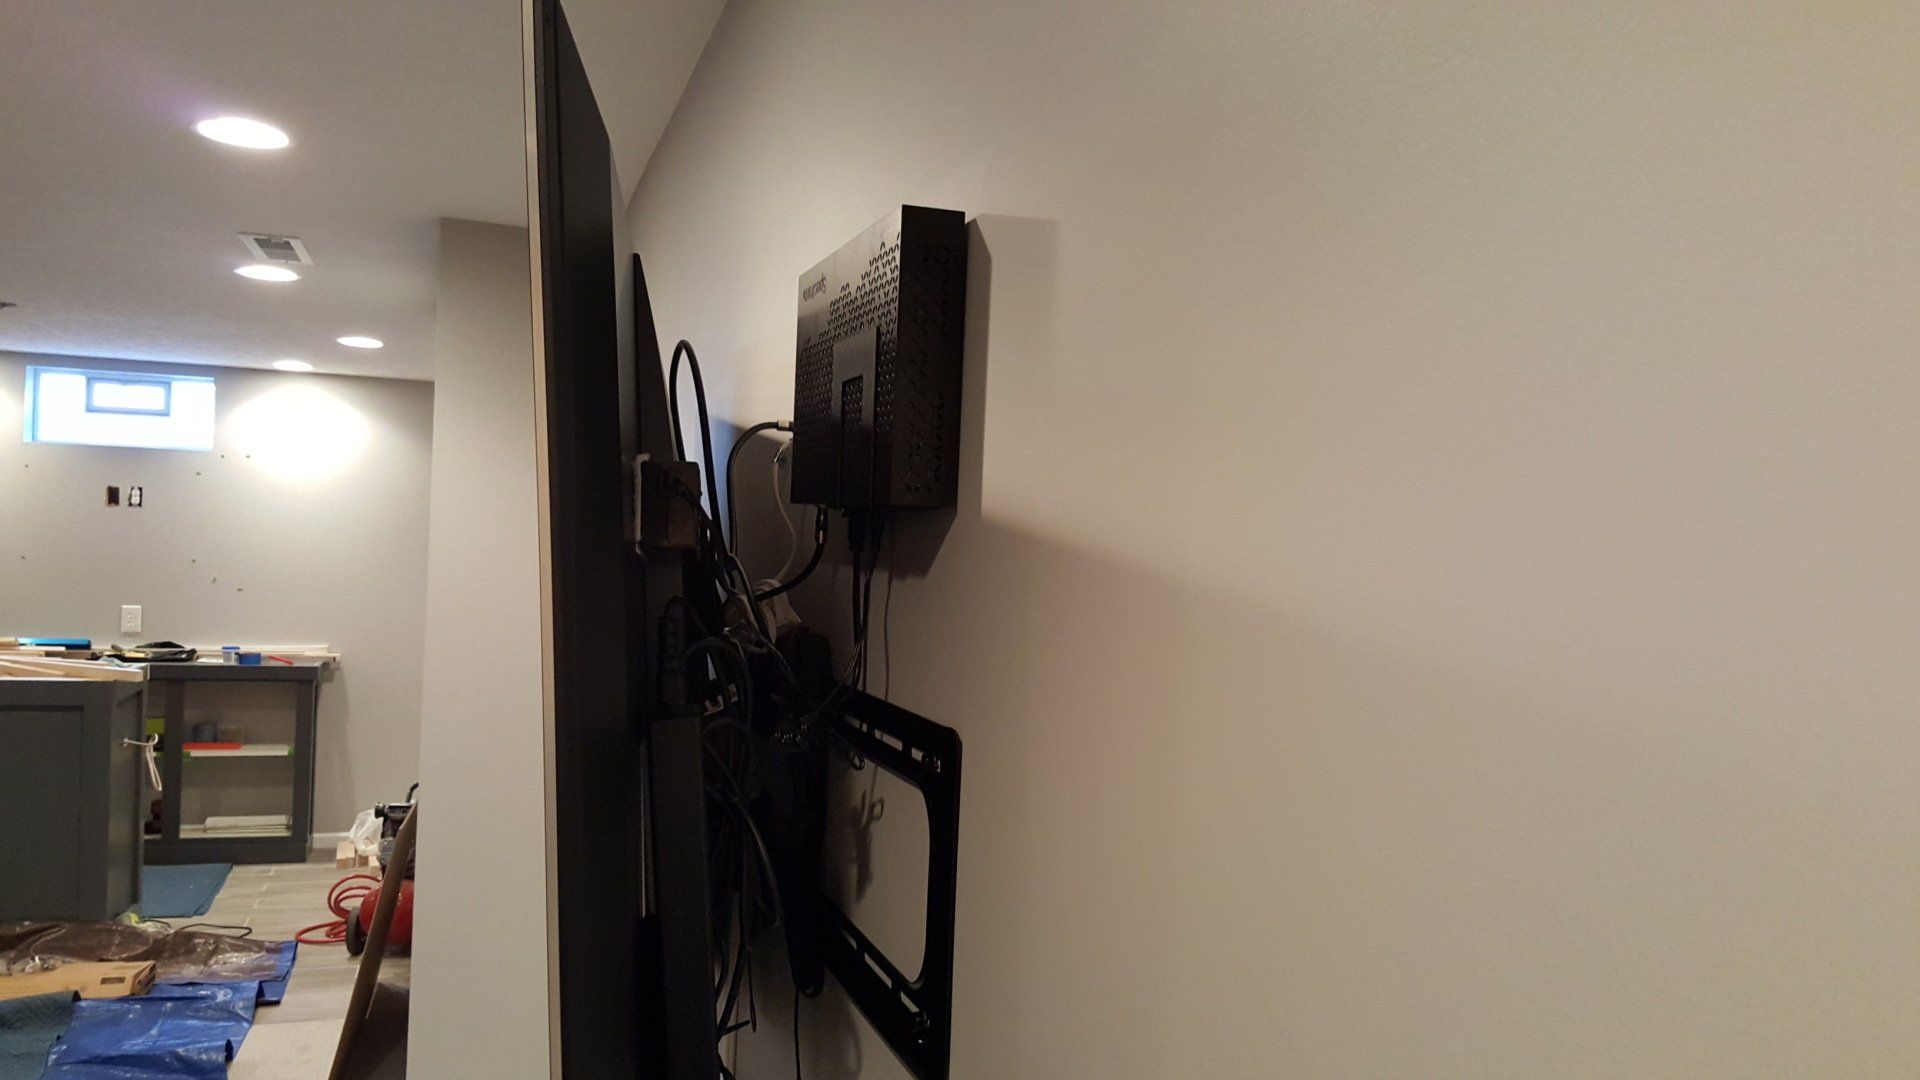 a tv mounted on a wall with a streaming box and cable box mounted behind the TV in northern ohio